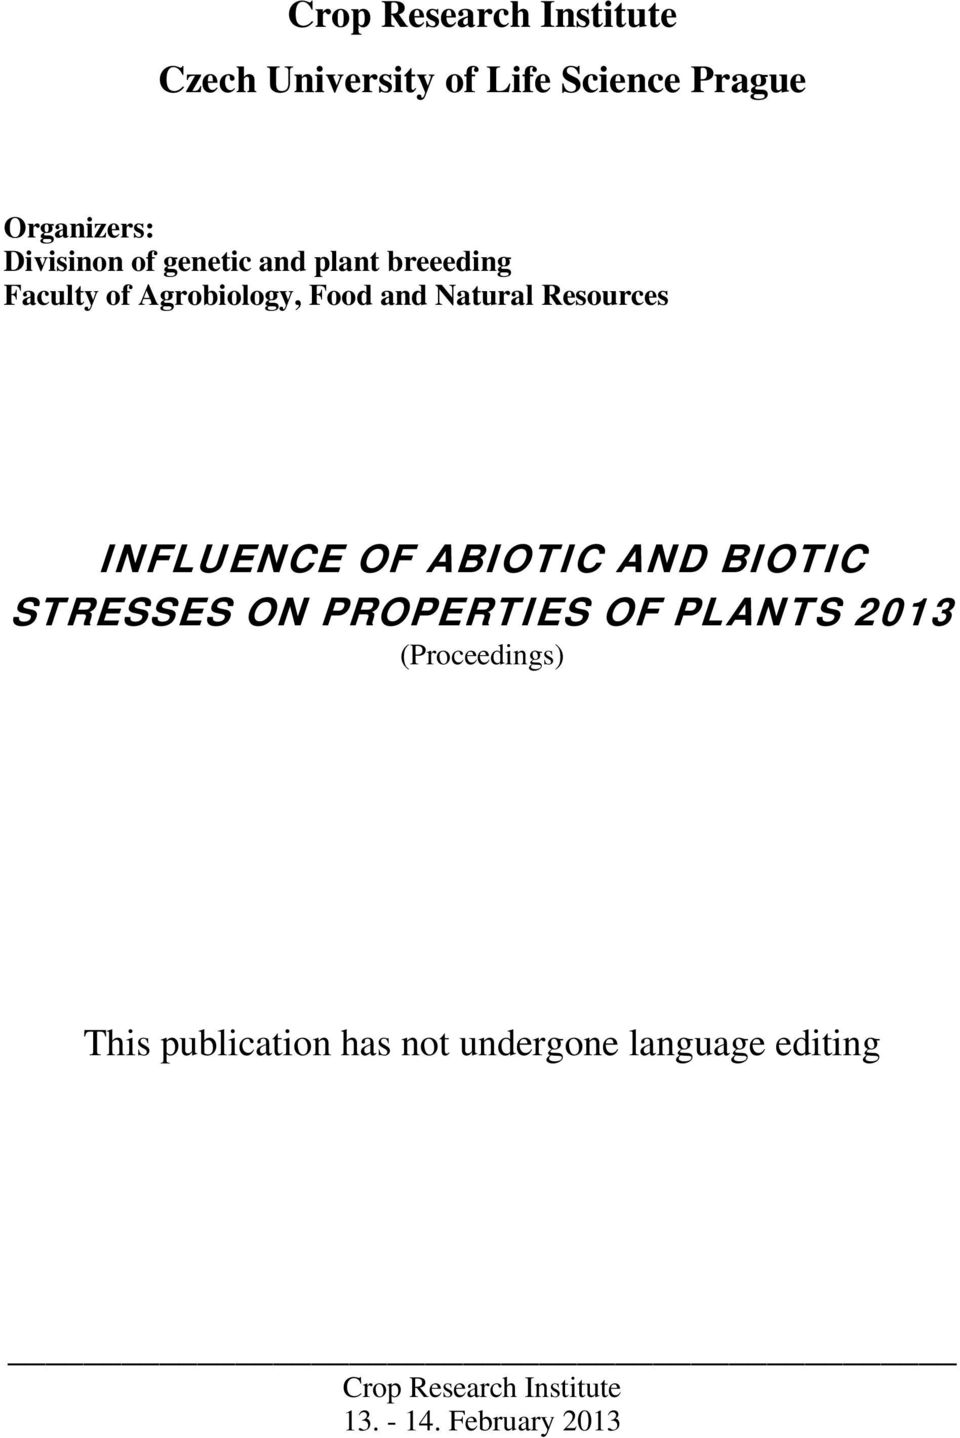 INFLUENCE OF ABIOTIC AND BIOTIC STRESSES ON PROPERTIES OF PLANTS 2013 (Proceedings)